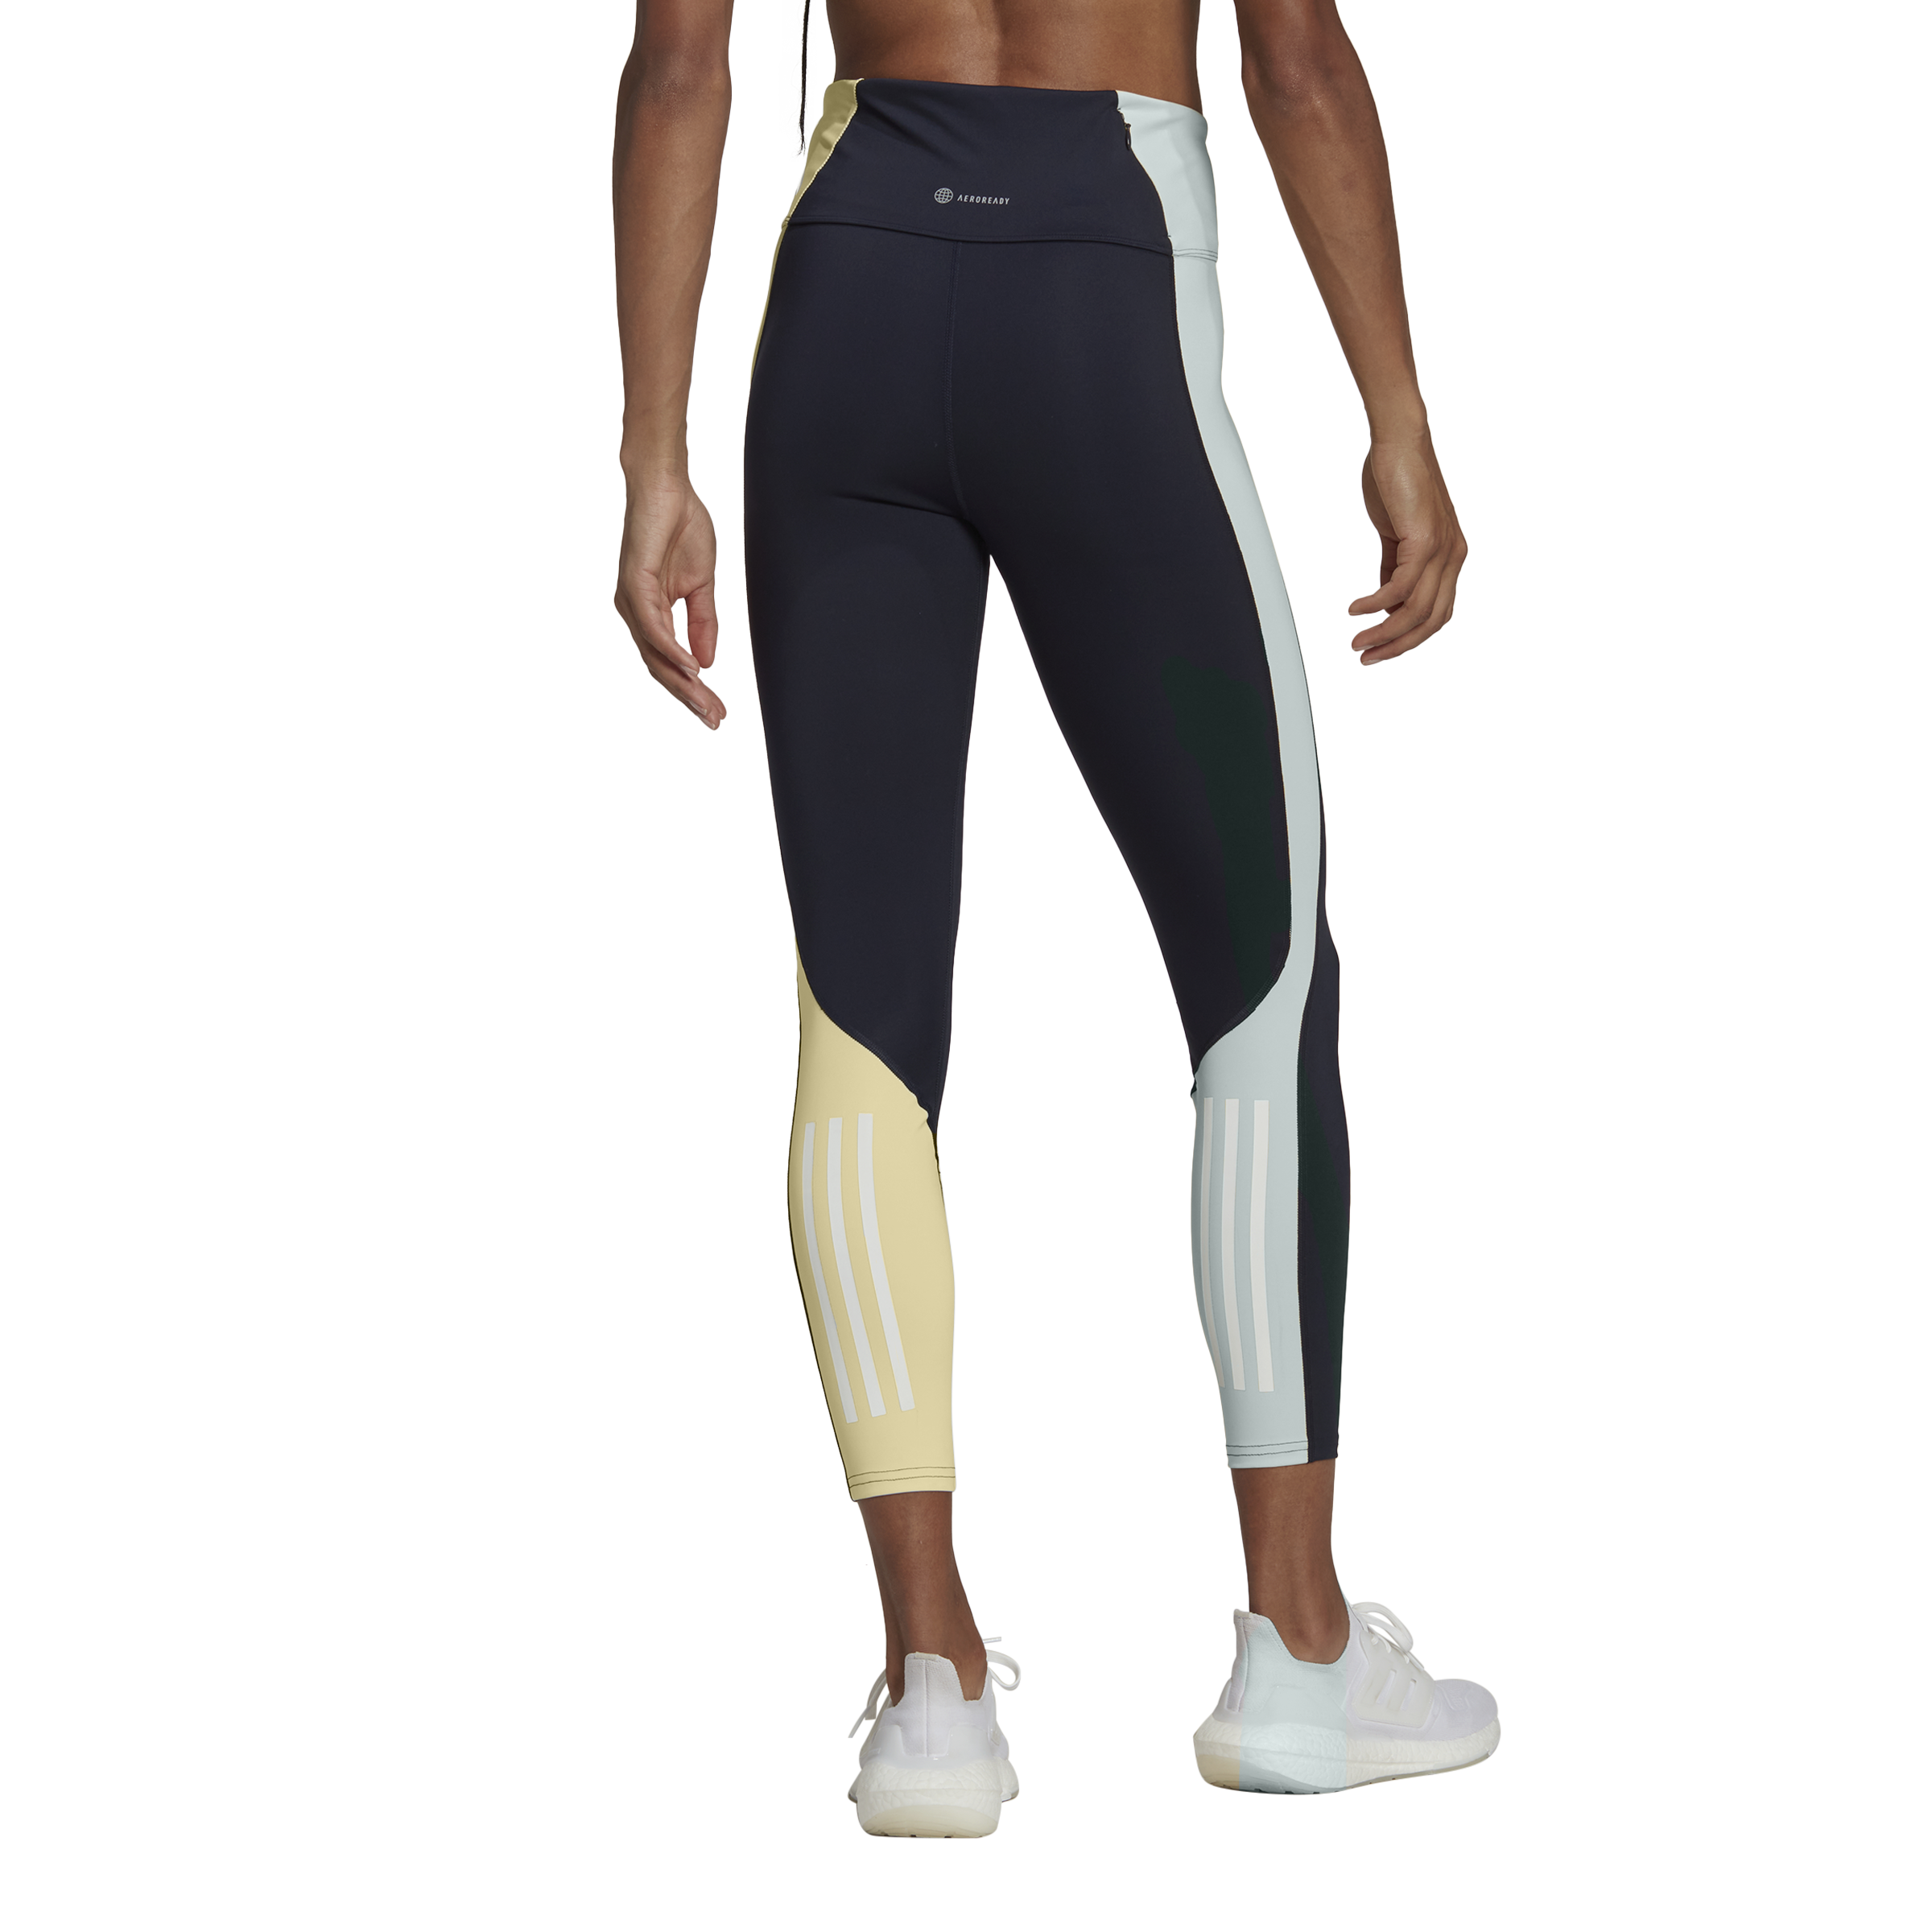 adidas Own the Run Colourblock 7/8 Running Tights - Womens - Legend Ink/Reflective Silver